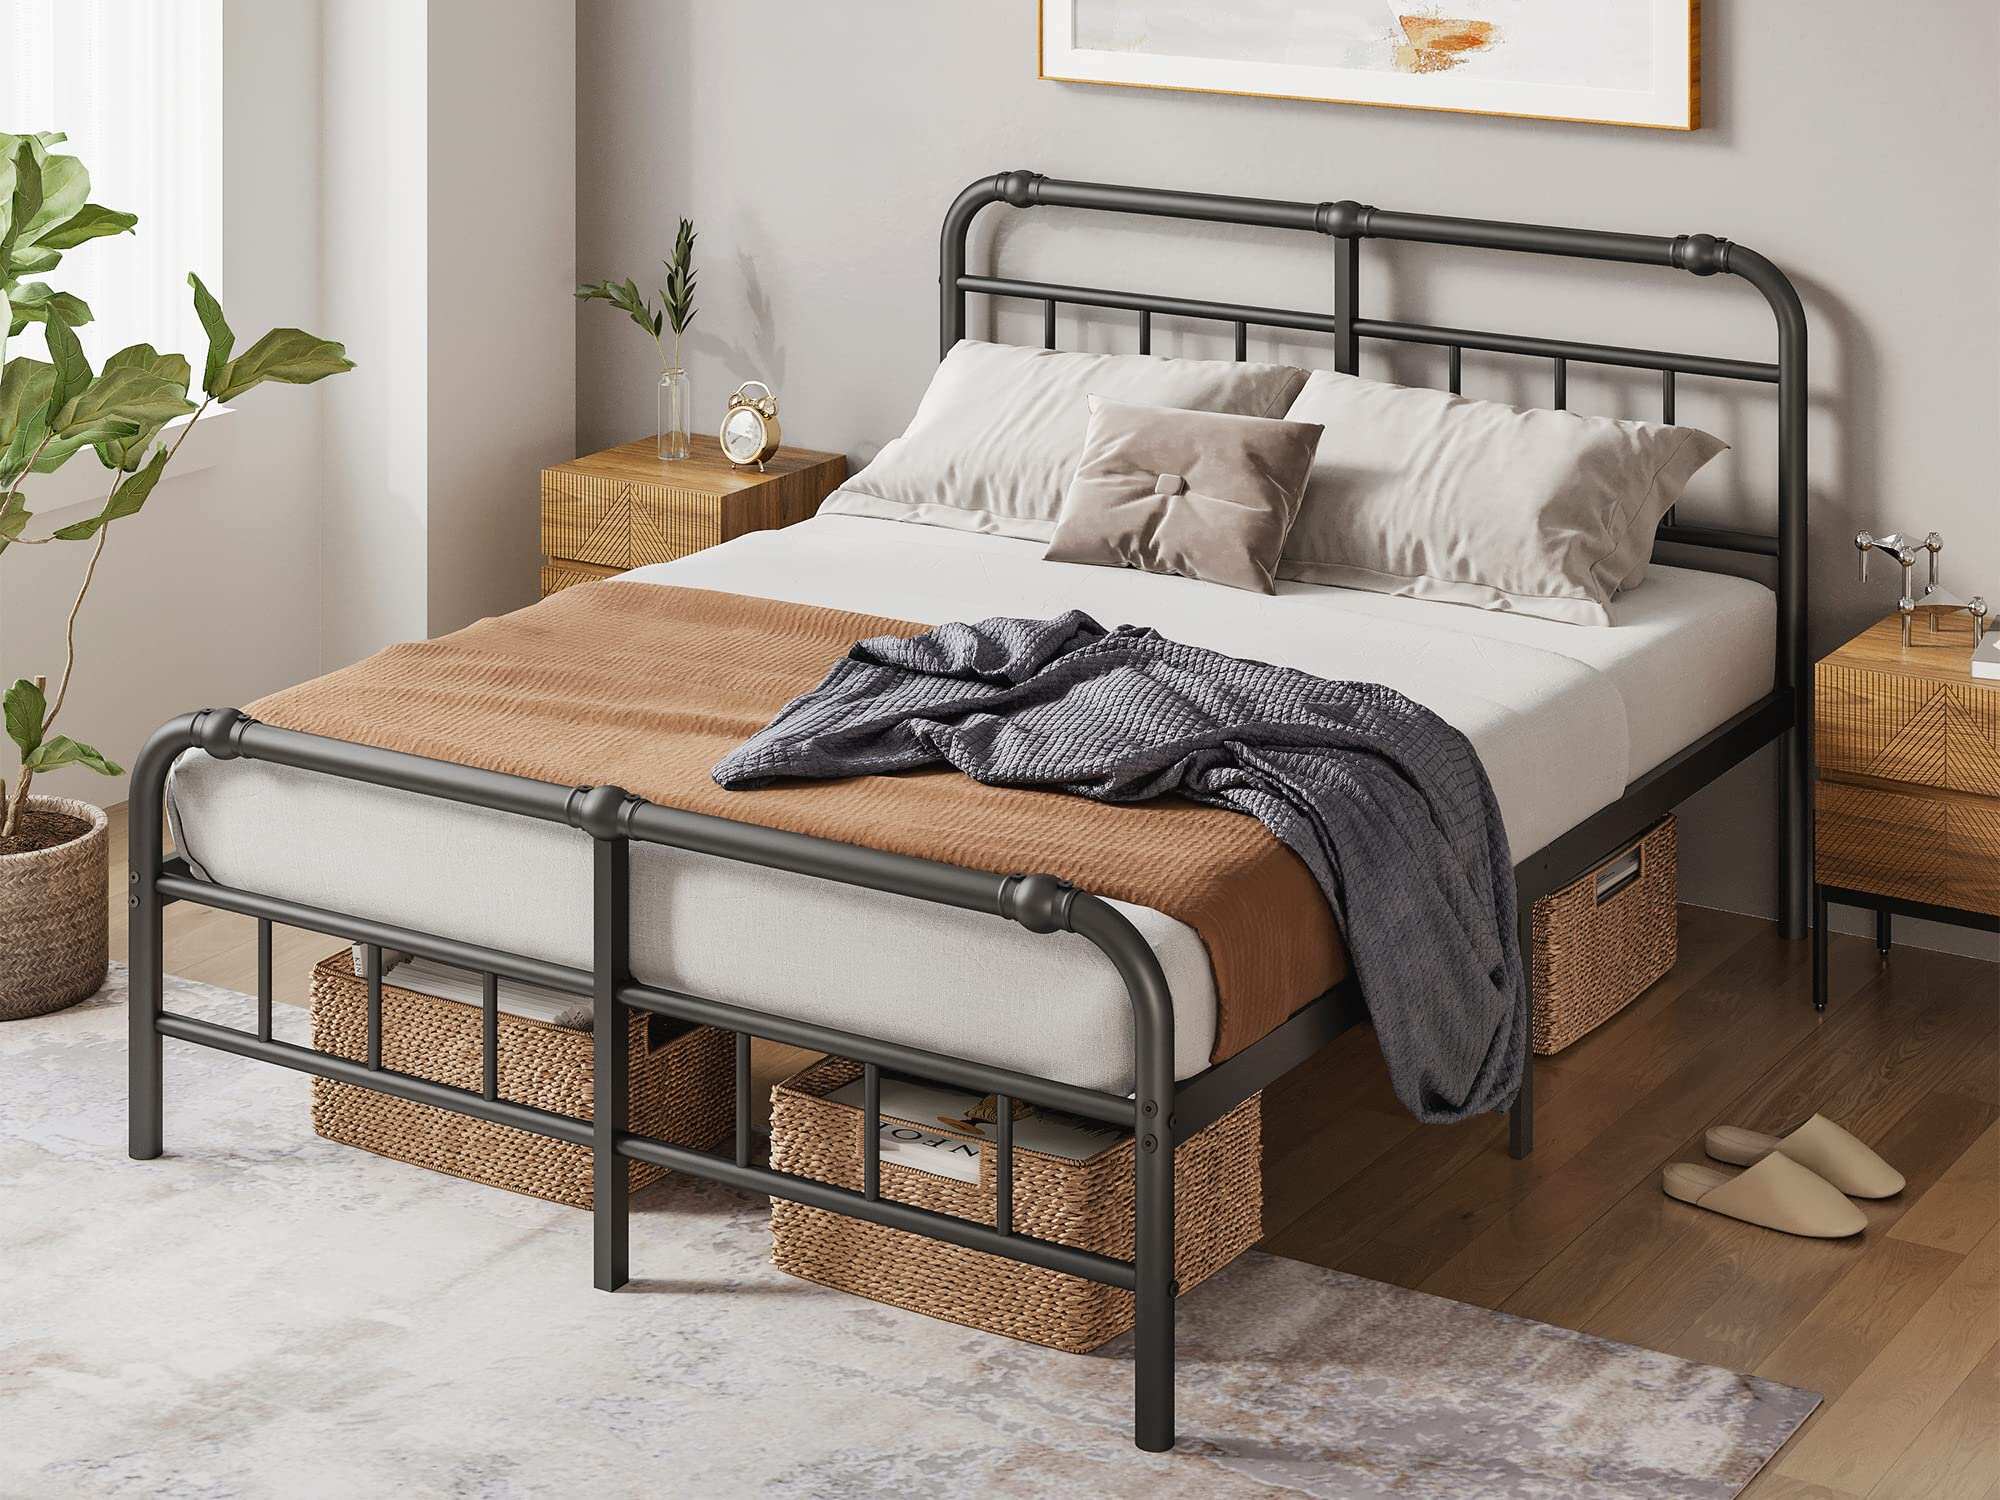 What Type Of Mattress Is Best For An Adjustable Bed